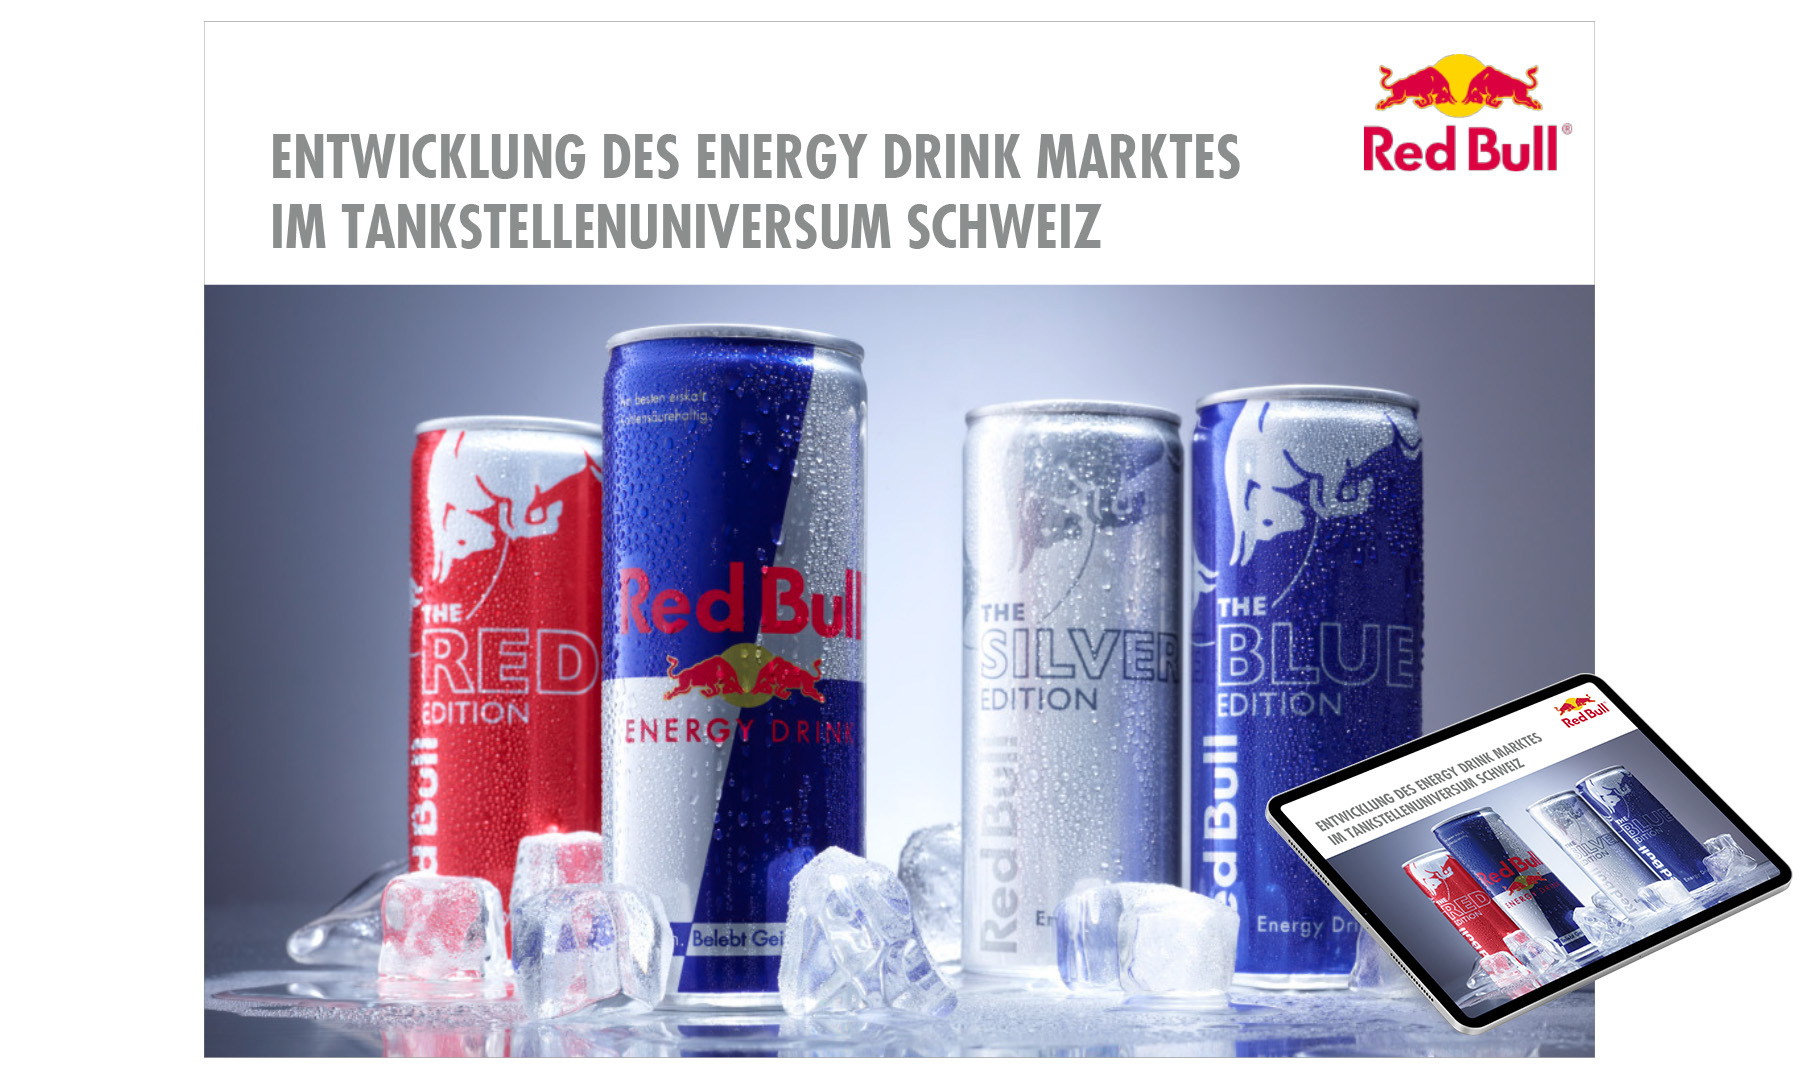 Red Bull animated Powerpoint Presentation 1